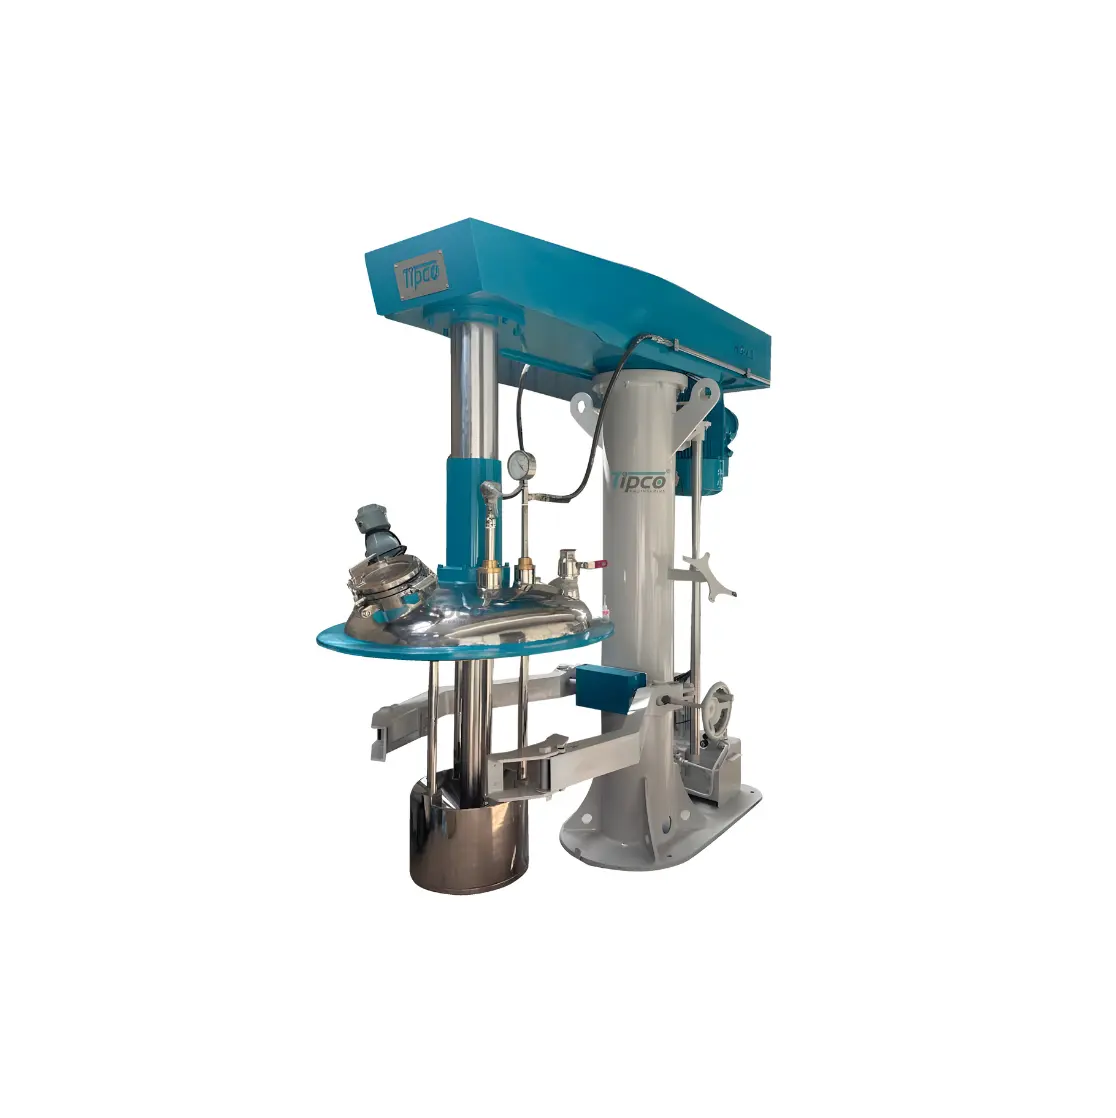 Standard Quality Basket Mill for High Viscosity Products Such as Paints and Coatings Inks from India Export